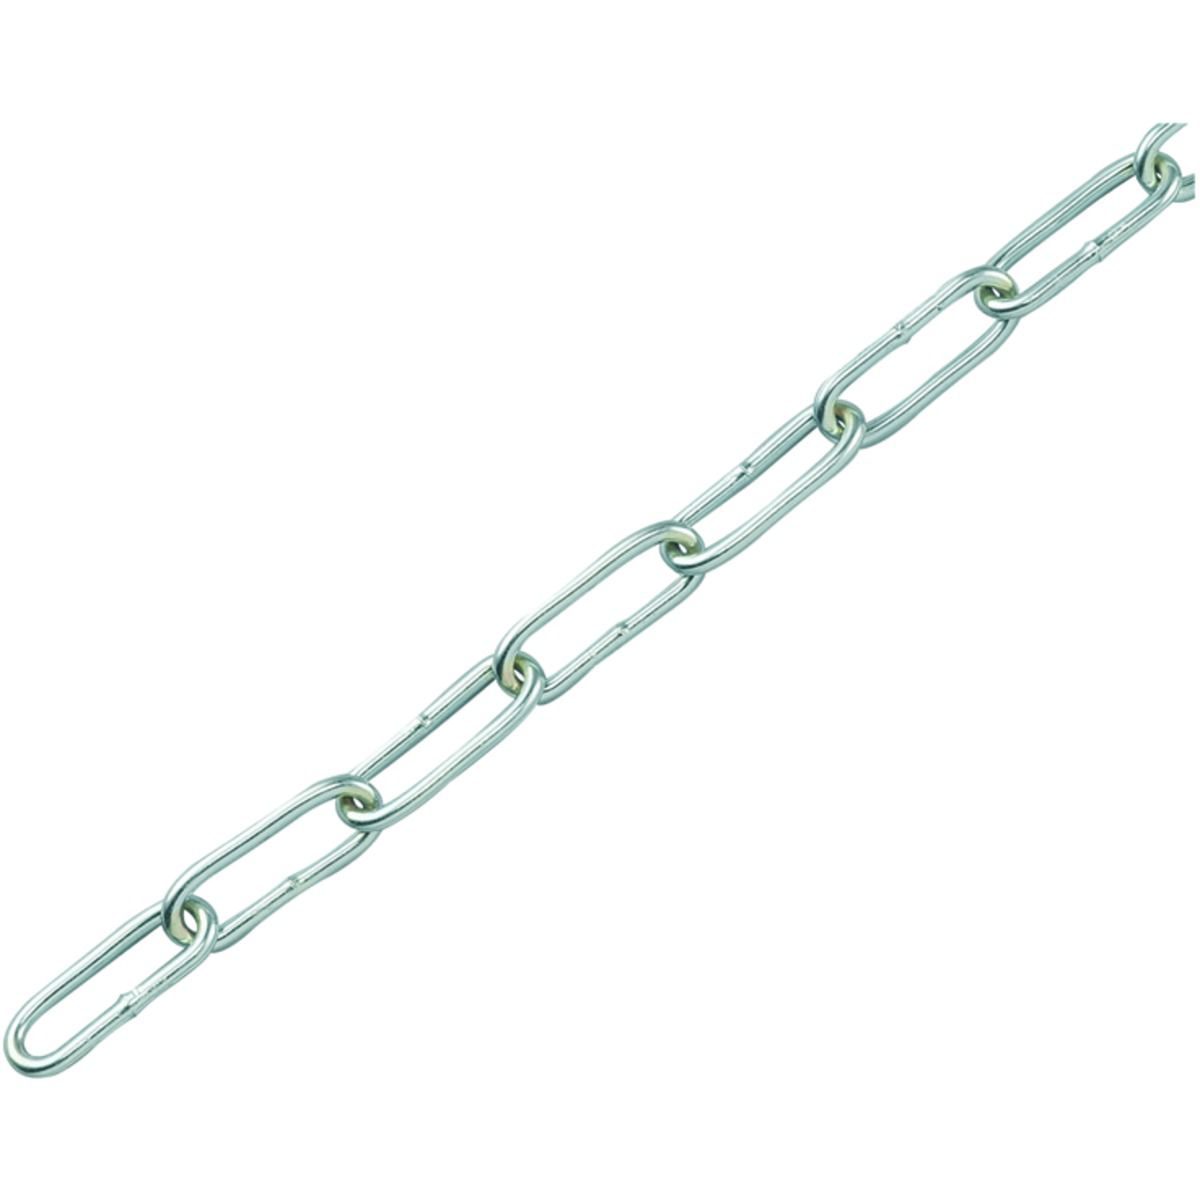 Image of Wickes Zinc Plated Steel Welded Chain - 3 x 26mm x 2m